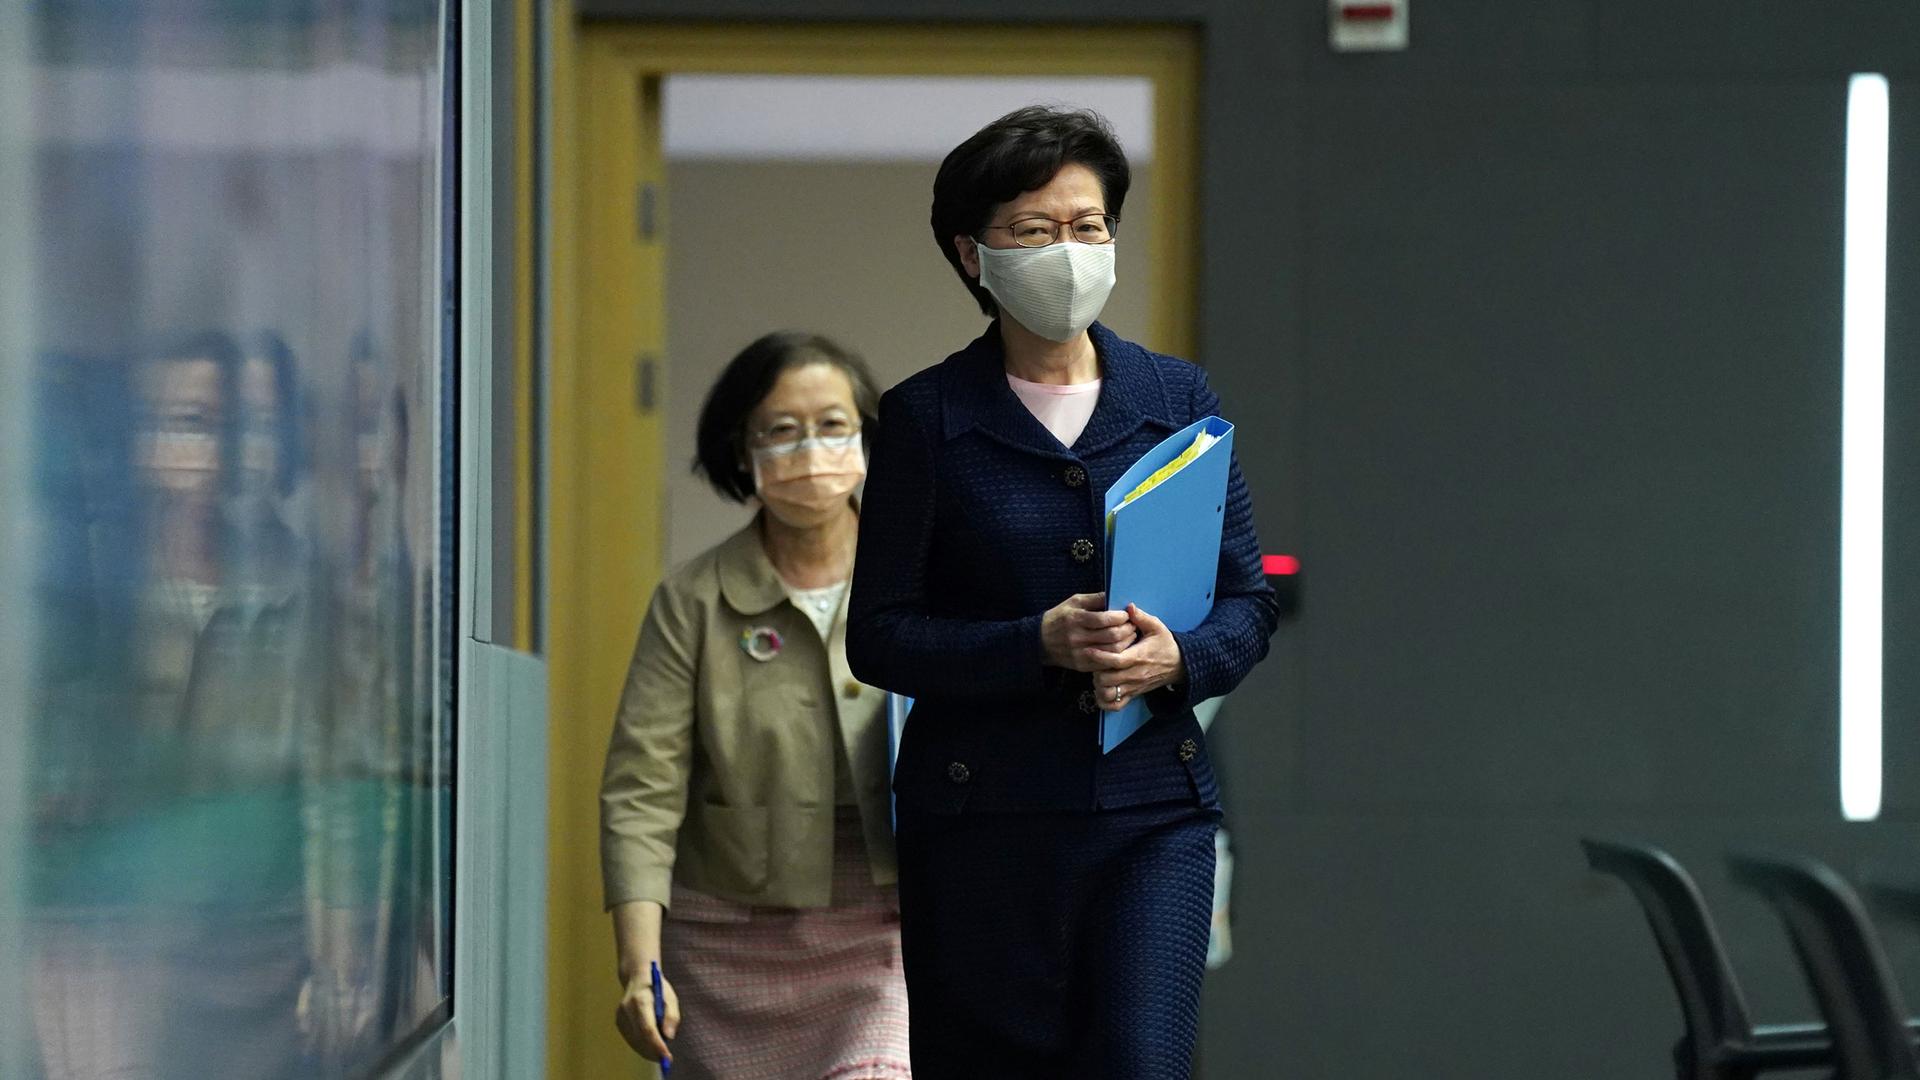 Hong Kong Chief Executive Carrie Lam is shown walking into a room and holding a blue folder.